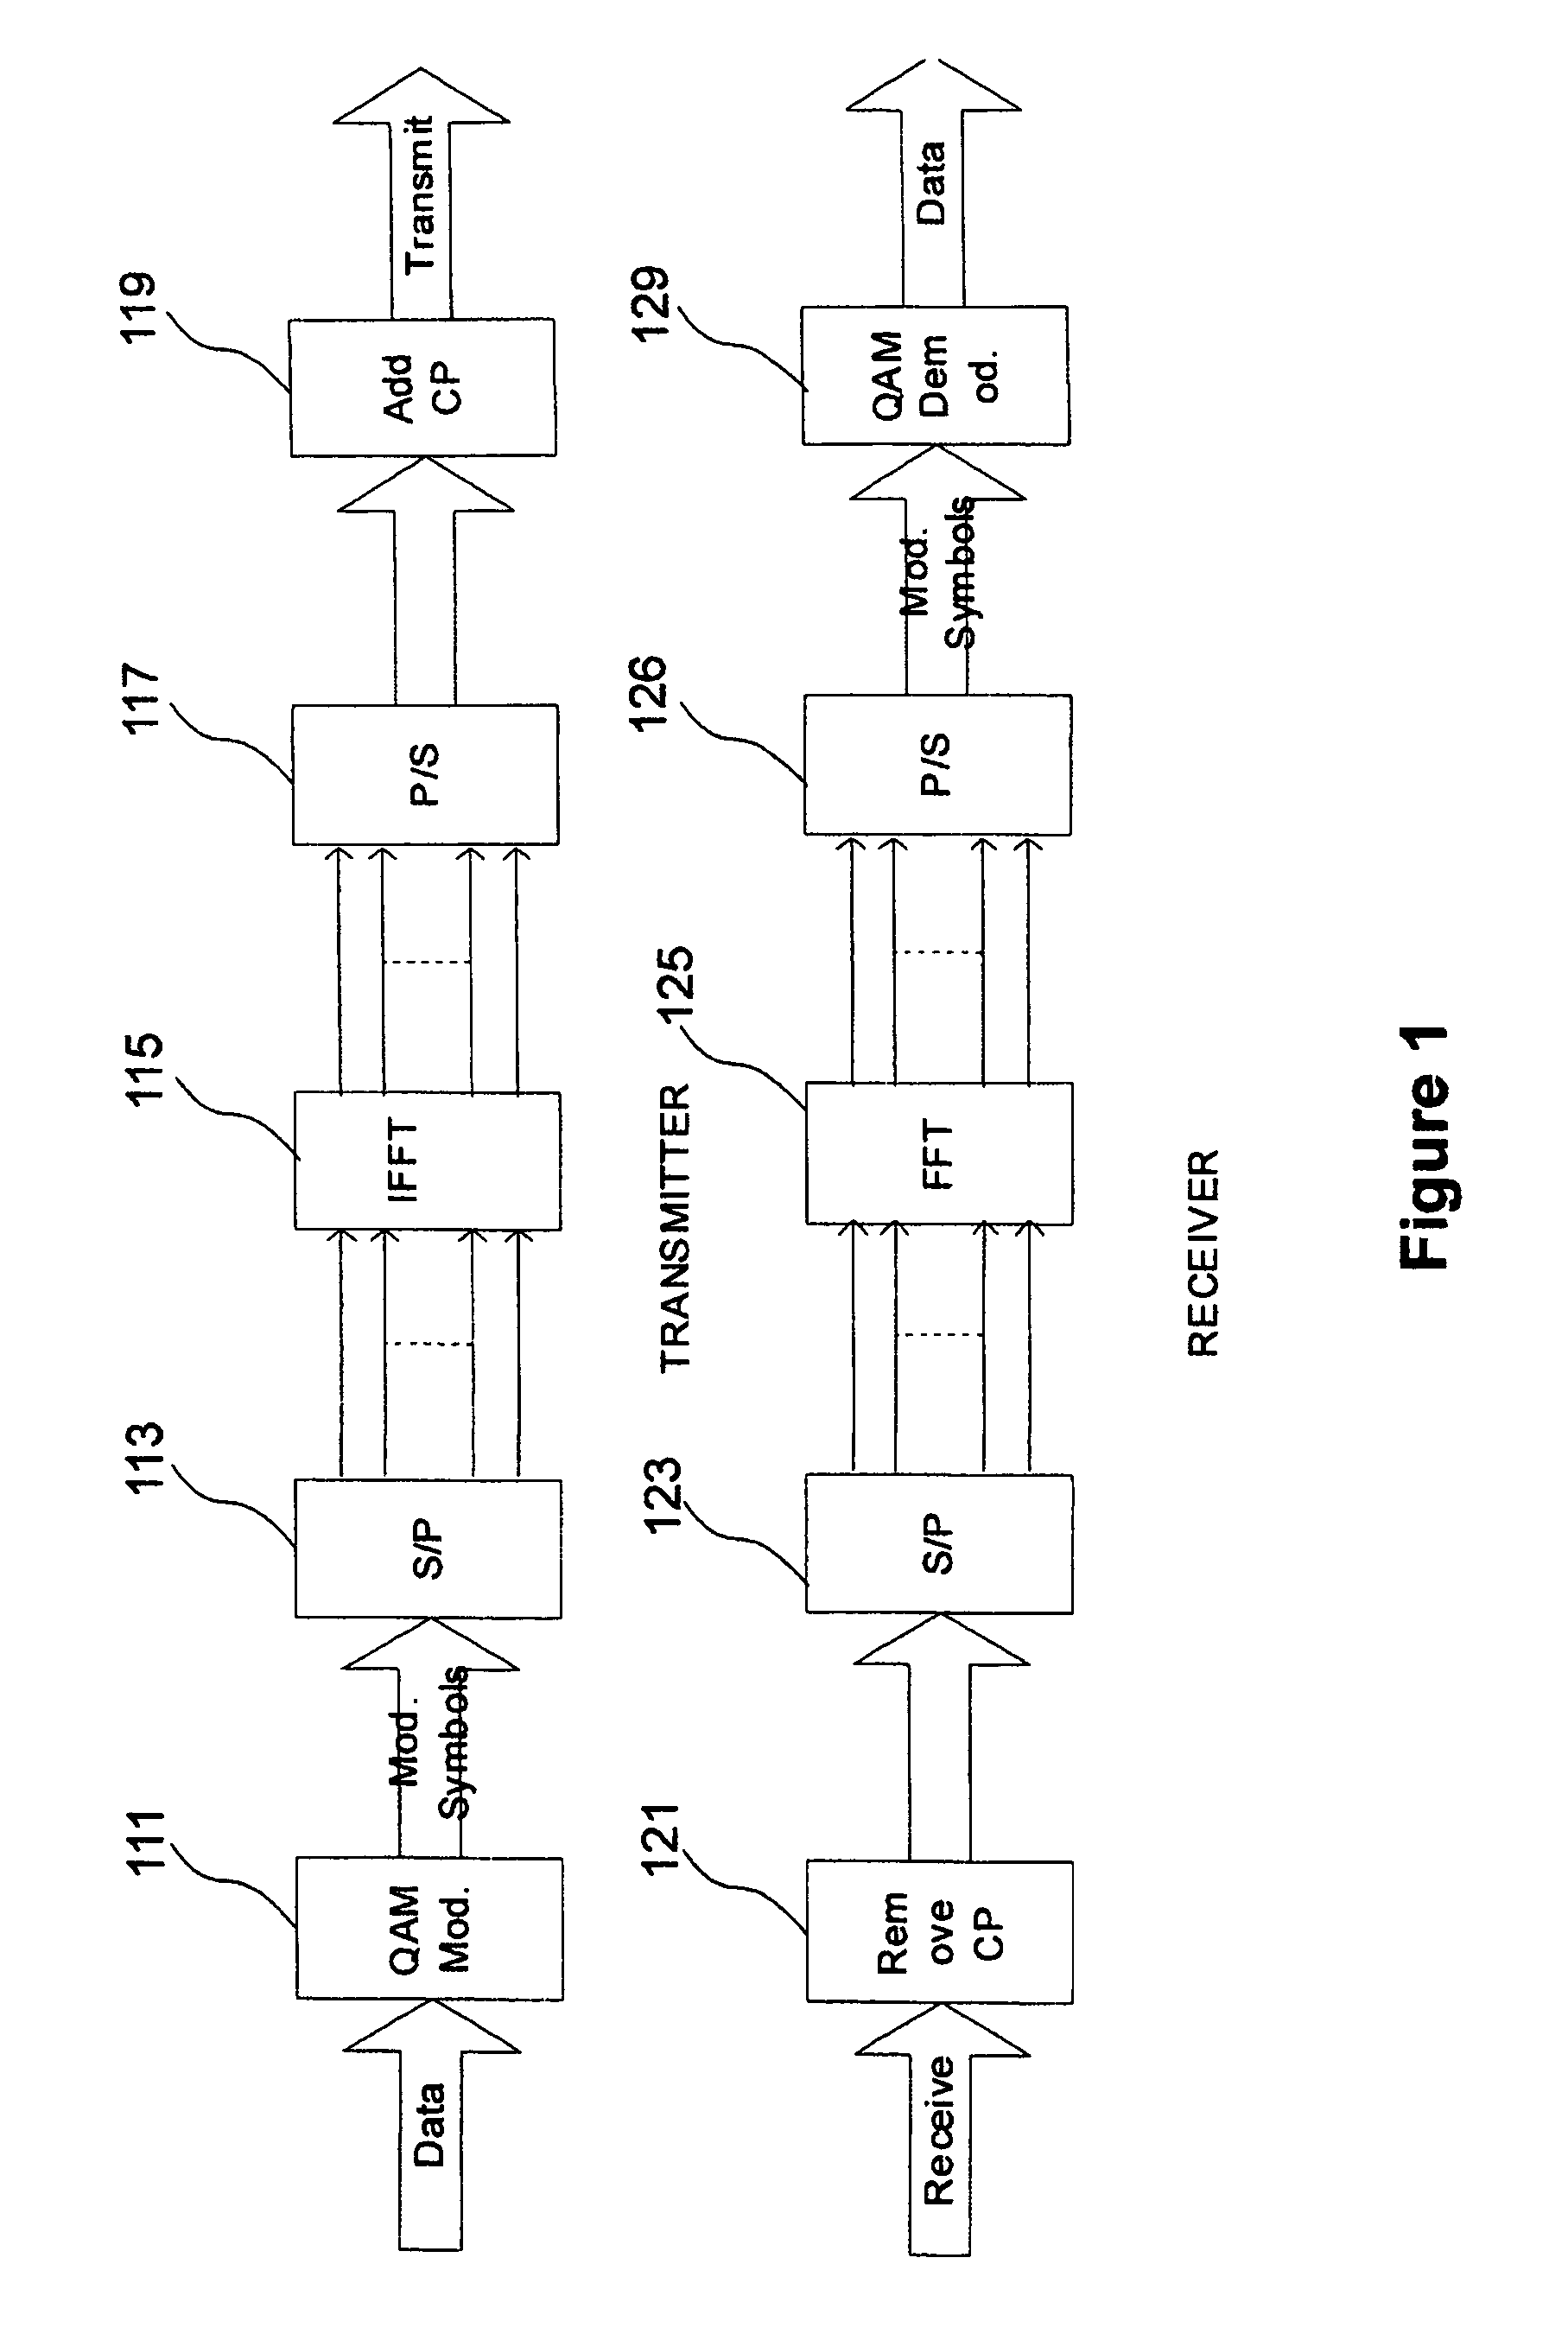 Methods of assigning resources for the uplink control channel in LTE